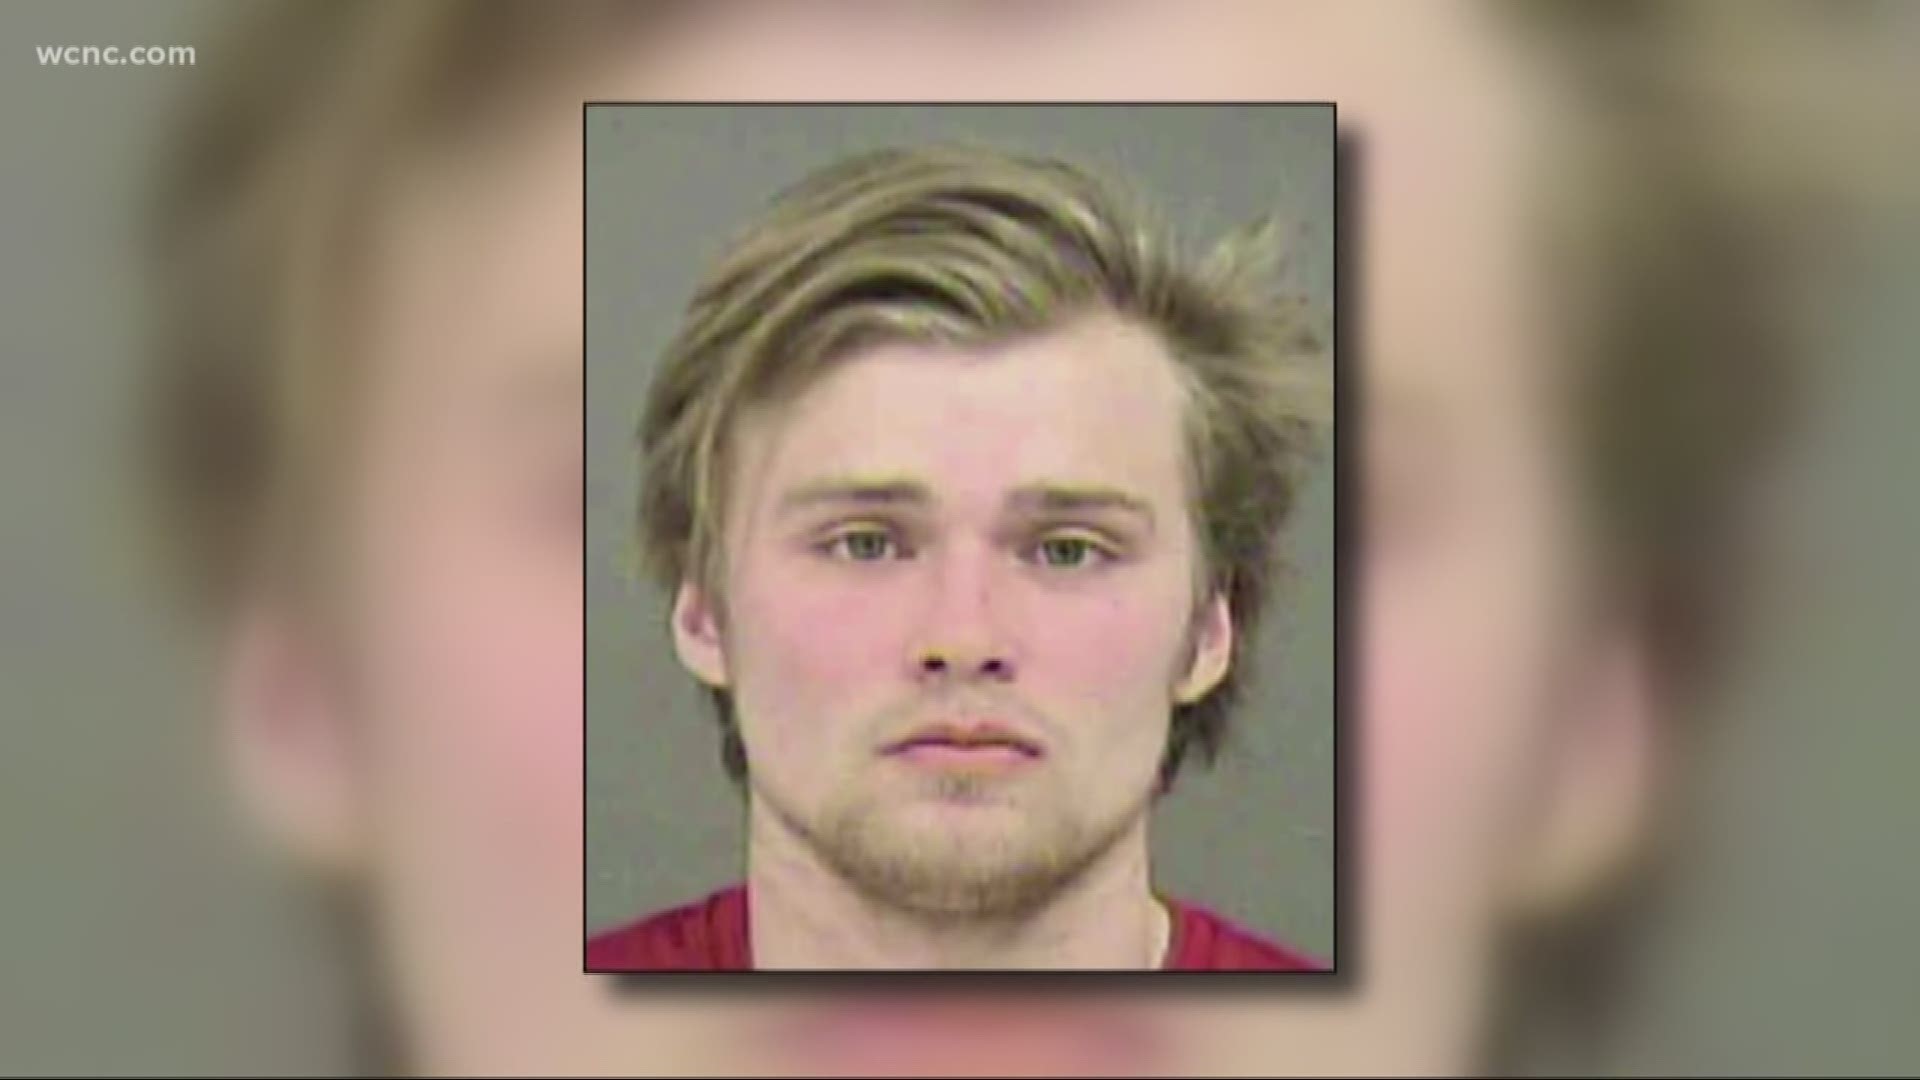 Jury selection is set to begin in the trial against Kevin Olsen who is being accused of raping and beating his former girlfriend.